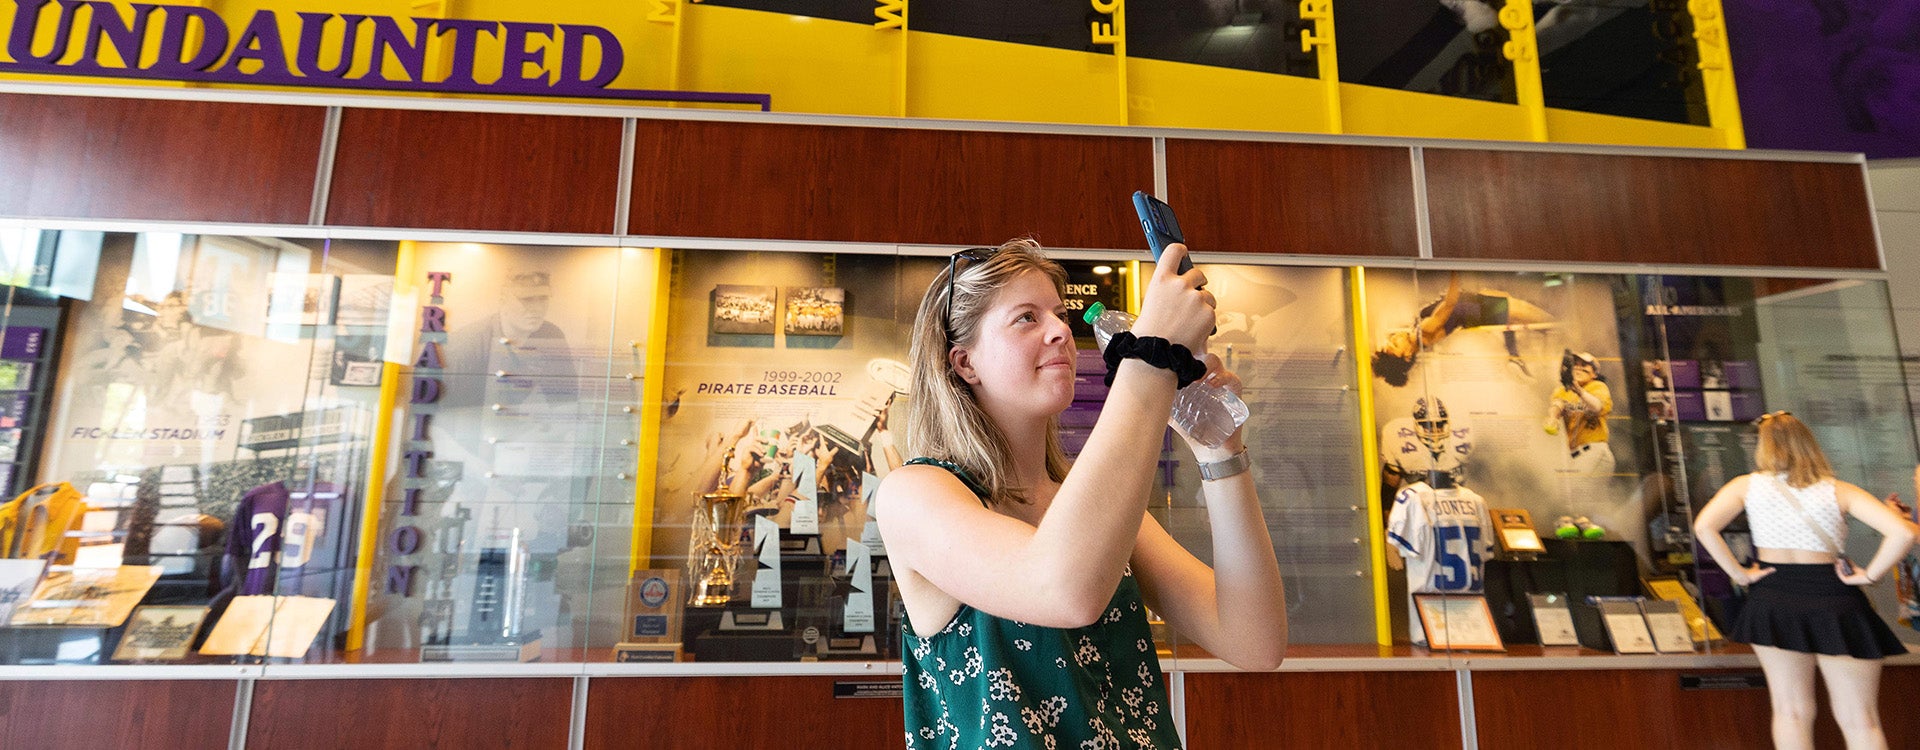 Jarieke de Haas, a student from the Netherlands, takes a video of the Hall of Fame display cases at Minges Coliseum. (Photo by Rhett Butler)